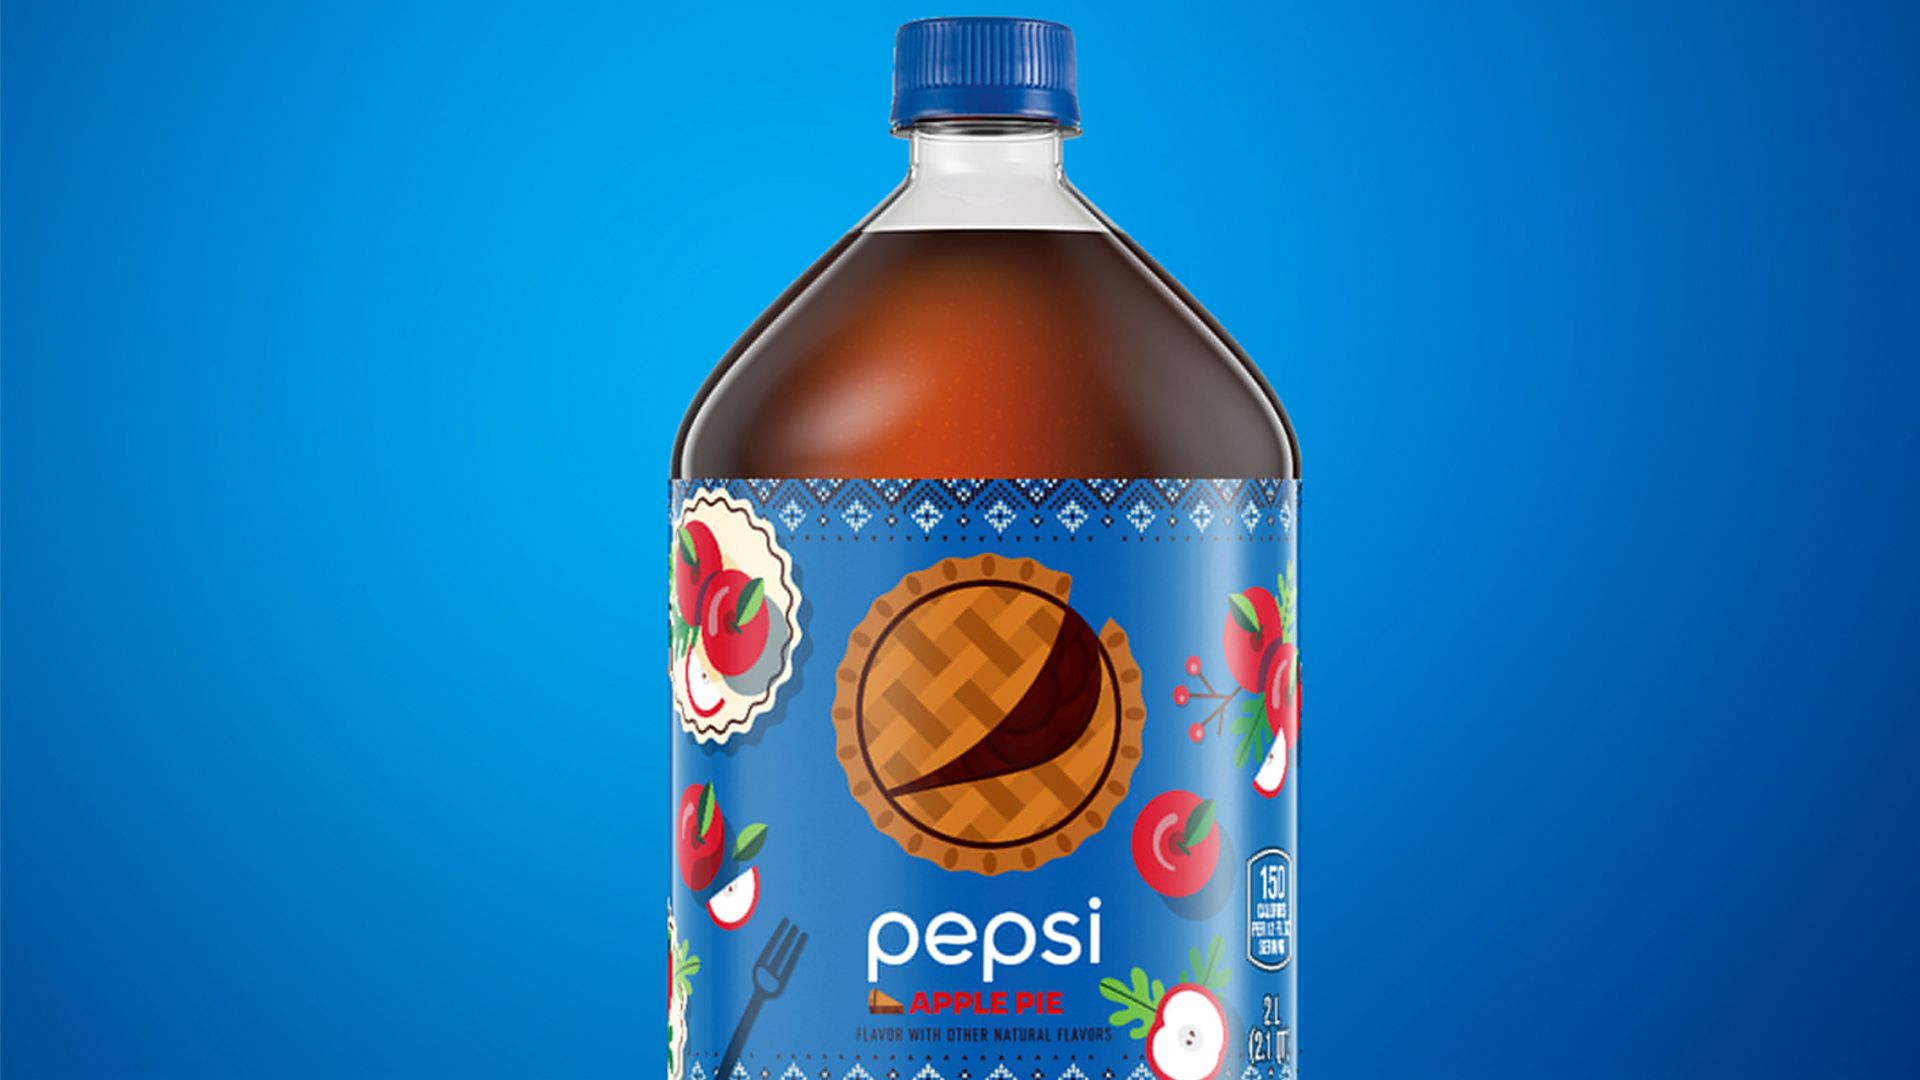 first pepsi bottle made